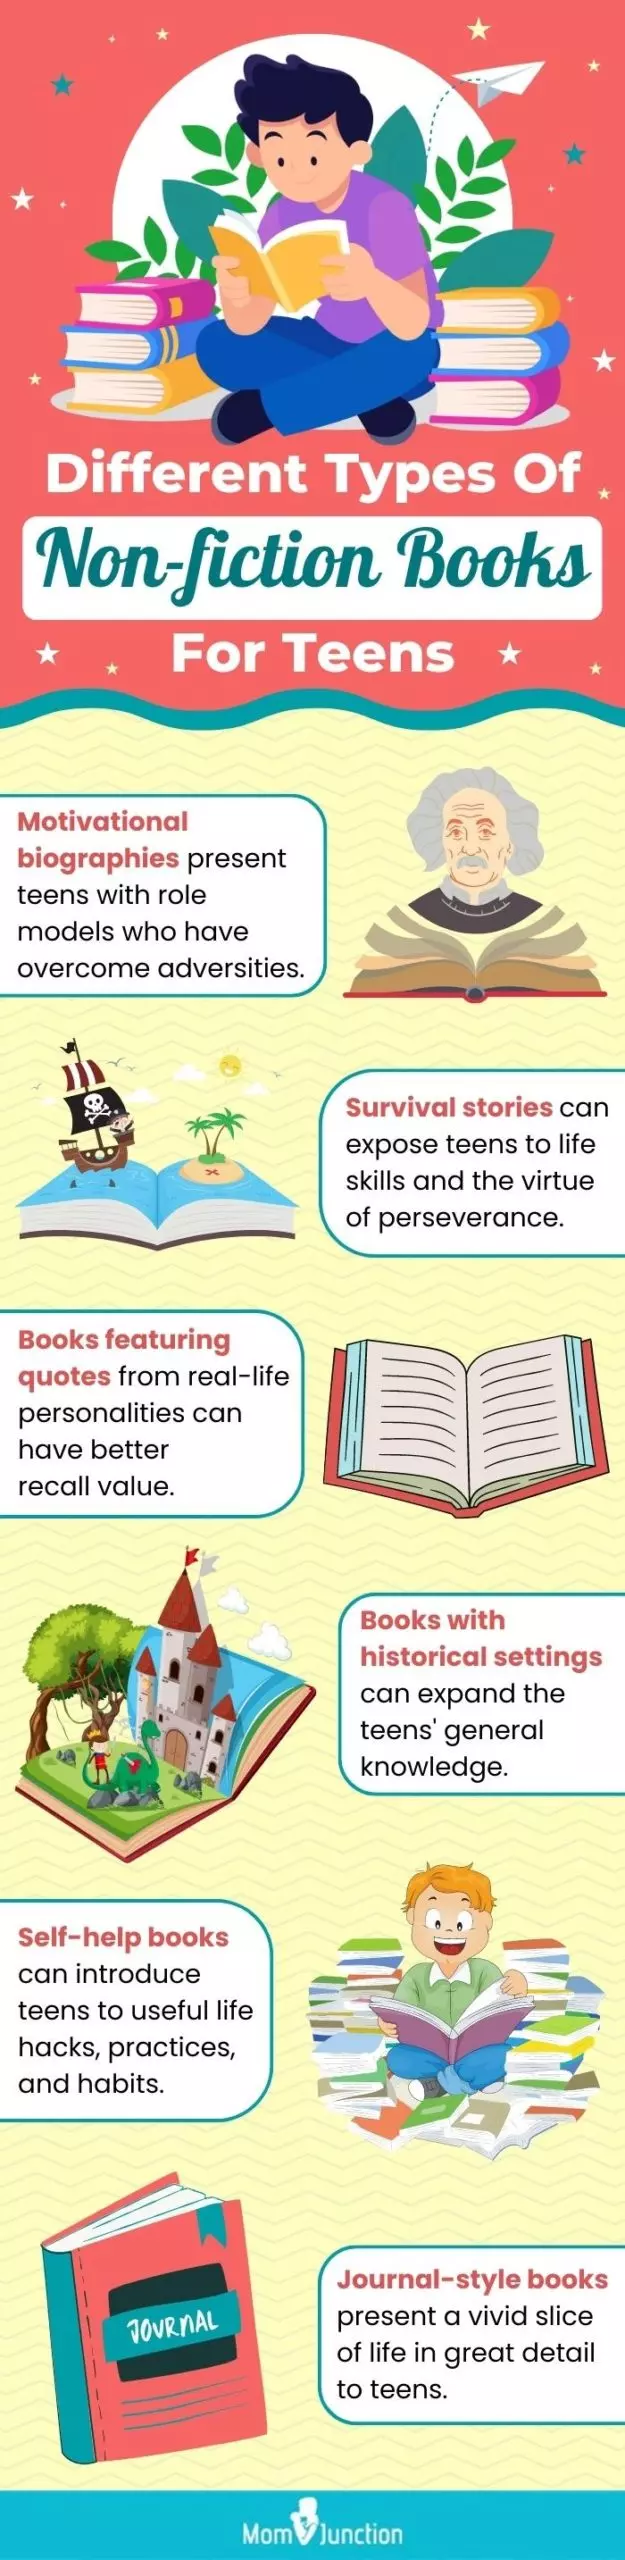 Different Types Of Non-fiction Books For Teens (infographic)